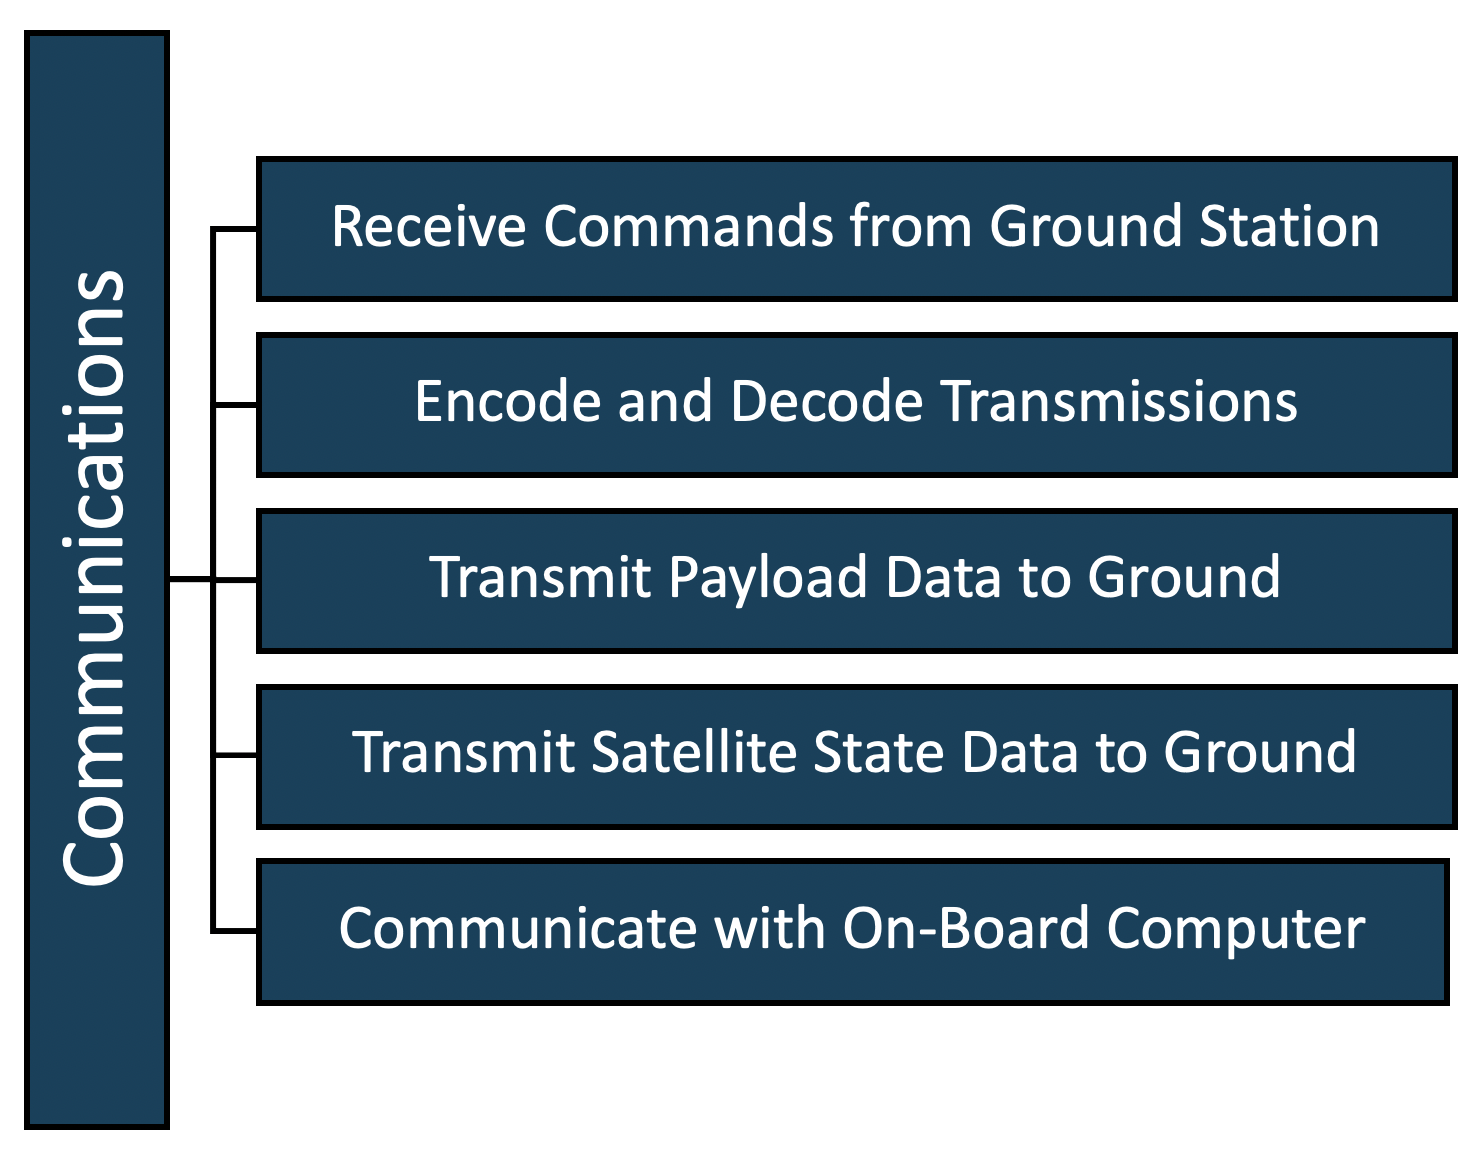 Communications
                    Receive Commands from Ground Station
                    Encode and Decode Transmissions
                    Transmit Payload Data to Ground
                    Transmit Satellite State Data to Ground 
                    Communicate with On-Board Computer
                